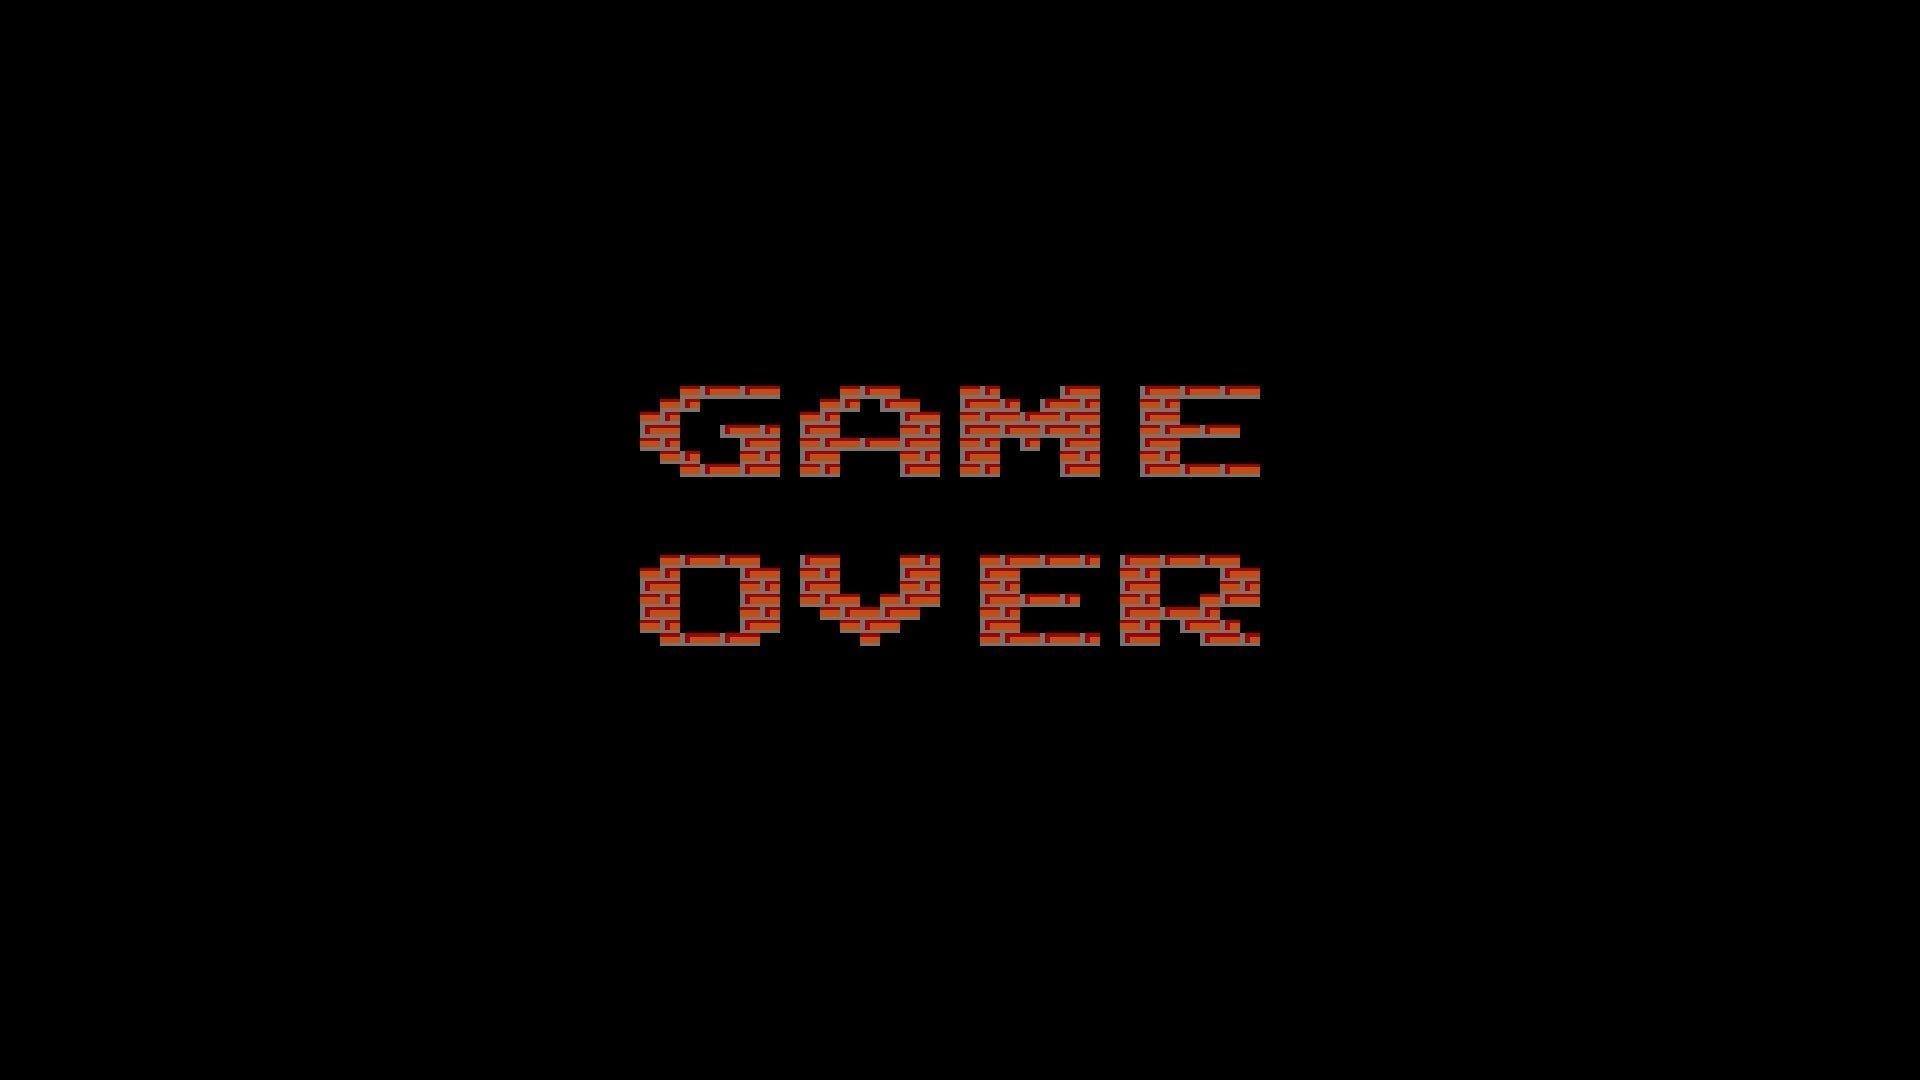 red brick game over display wallpaper digital art GAME OVER #minimalism #text video games retro games black ba. Black background quotes, HD background, Wallpaper